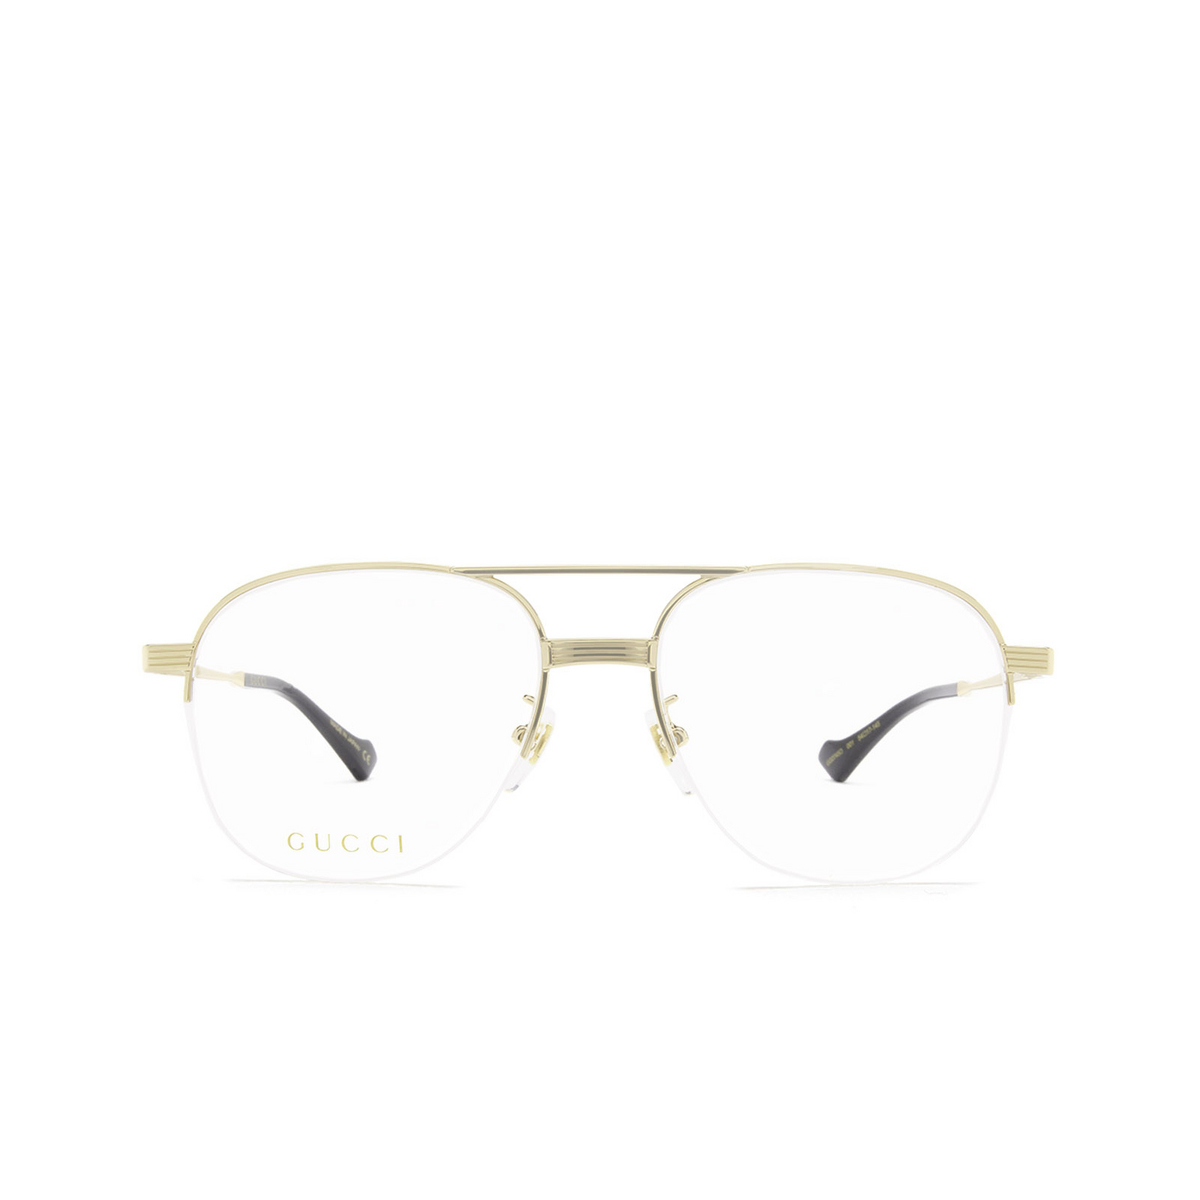 Gucci® Aviator Eyeglasses: GG0745O color Gold 001 - front view.